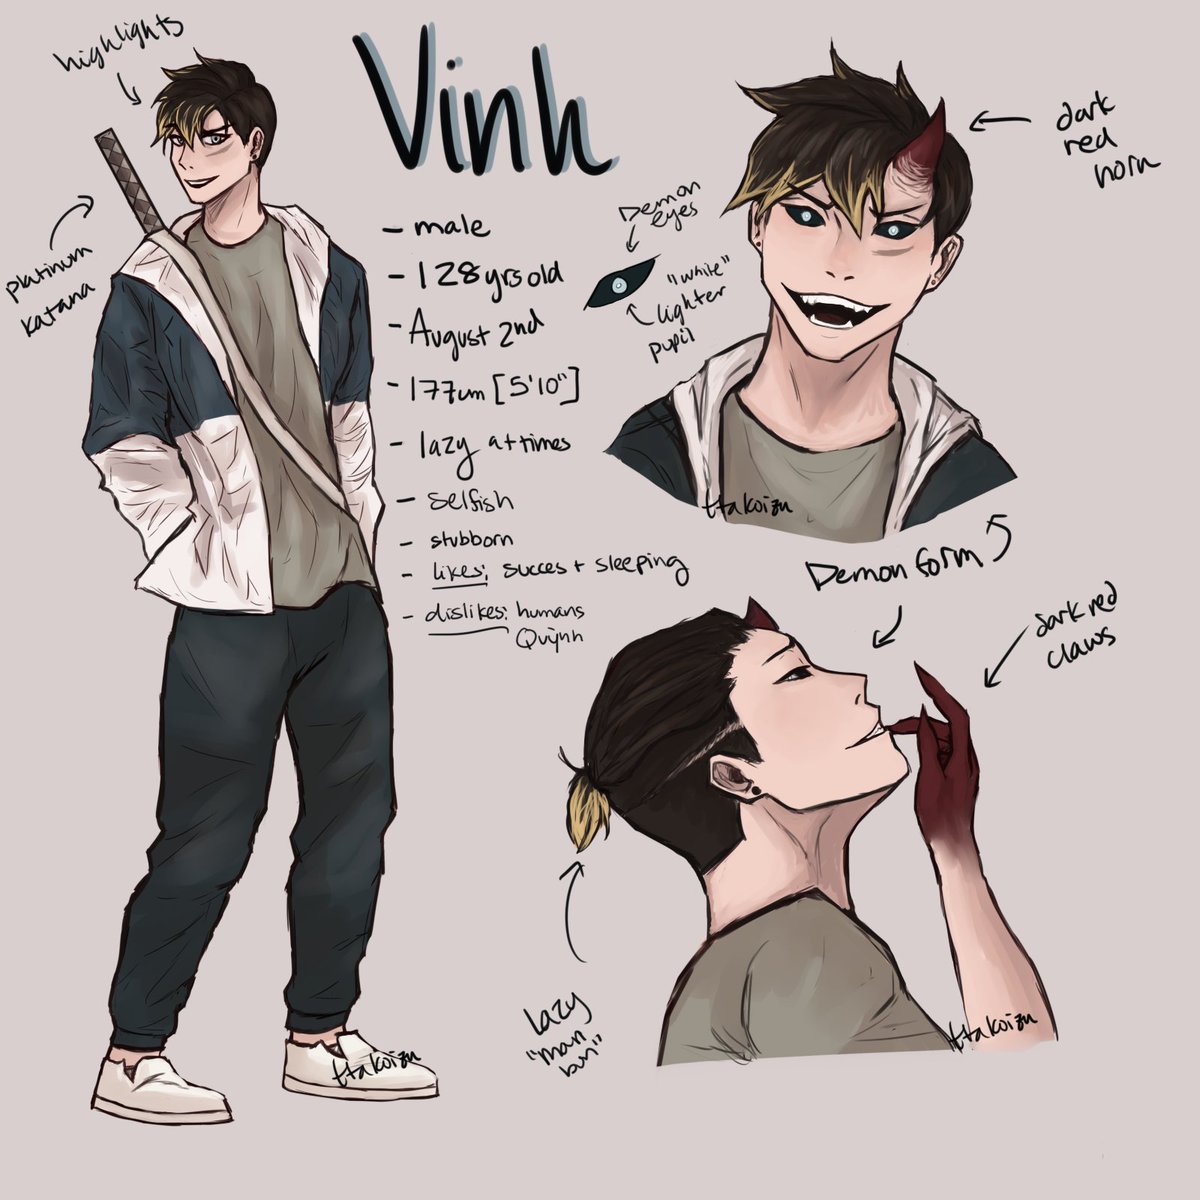 Introducing Mystery dude: Vinh! He's the guy in the last page of the recent comic of Q's past, he's a lazy butt. His name means "glory" in Vietnamese :)
#originalcharacter #ocs 